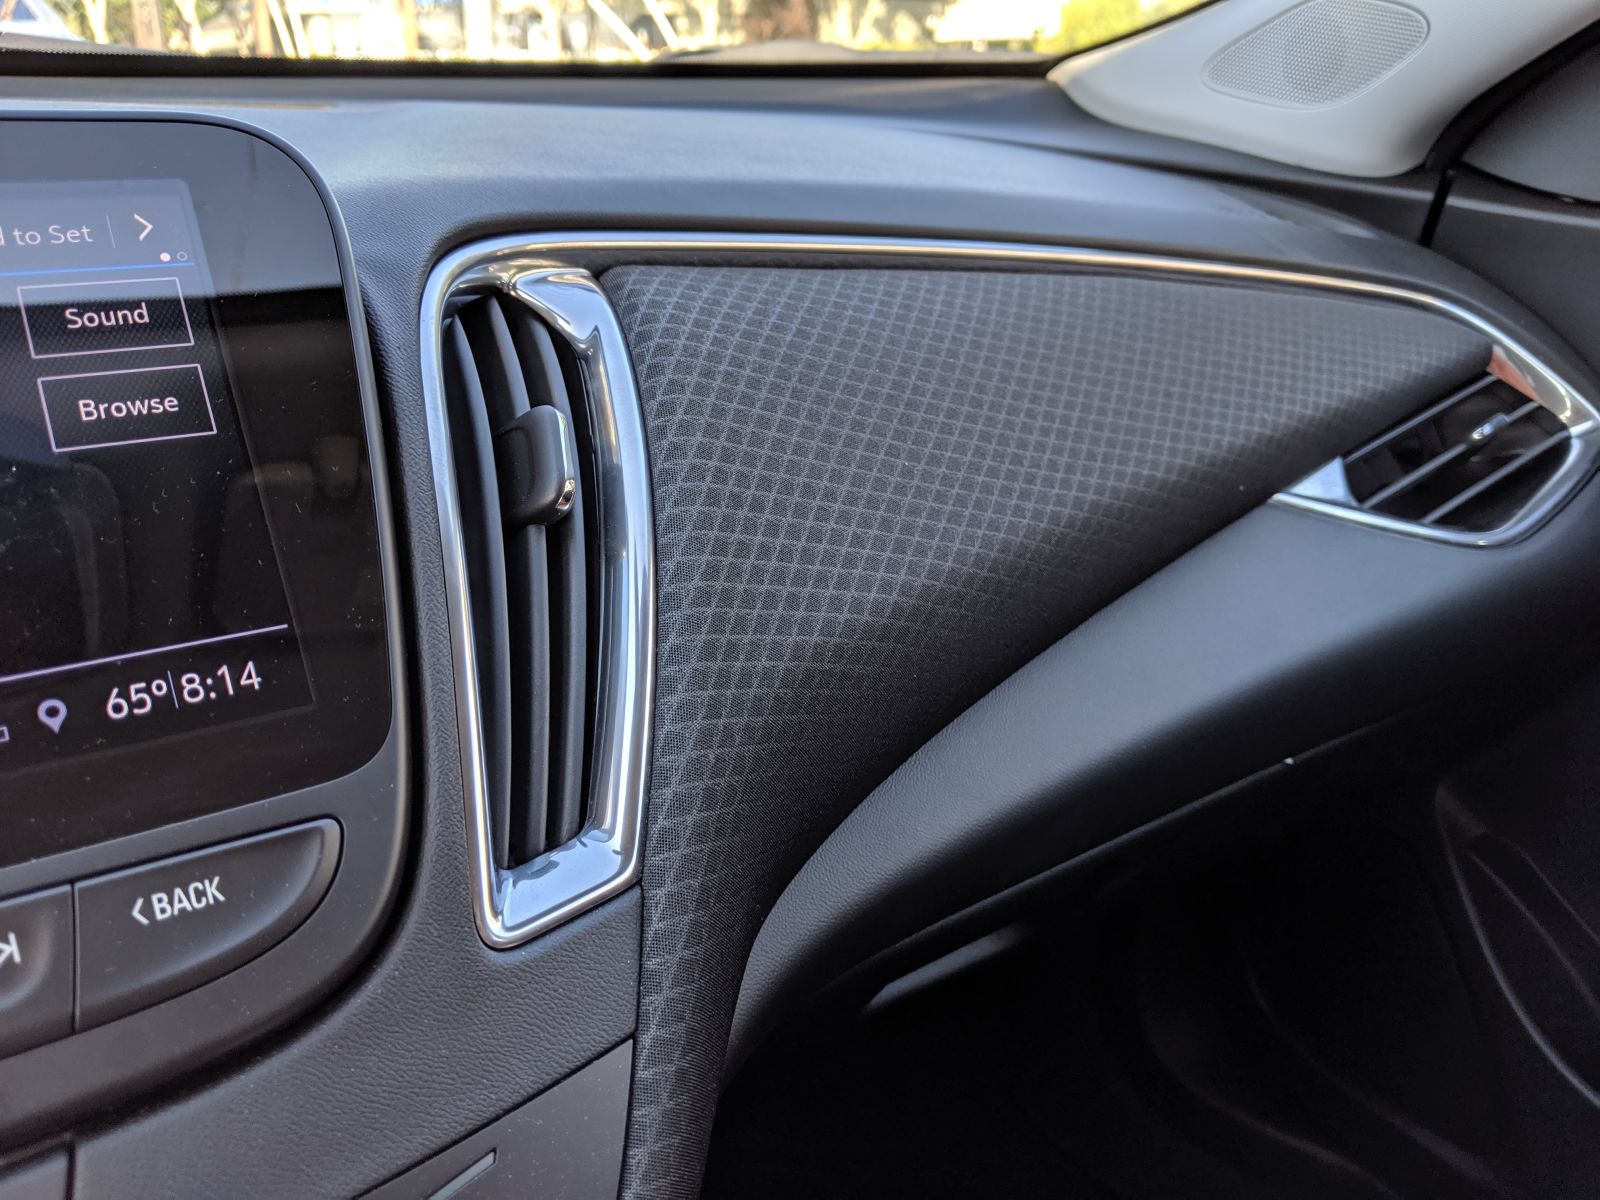 The cloth dashboard treatment is my favourite thing about GM’s passenger cars. Also, the climate blowers have unique shapes. Overall interior design is modern without falling into design cliches.